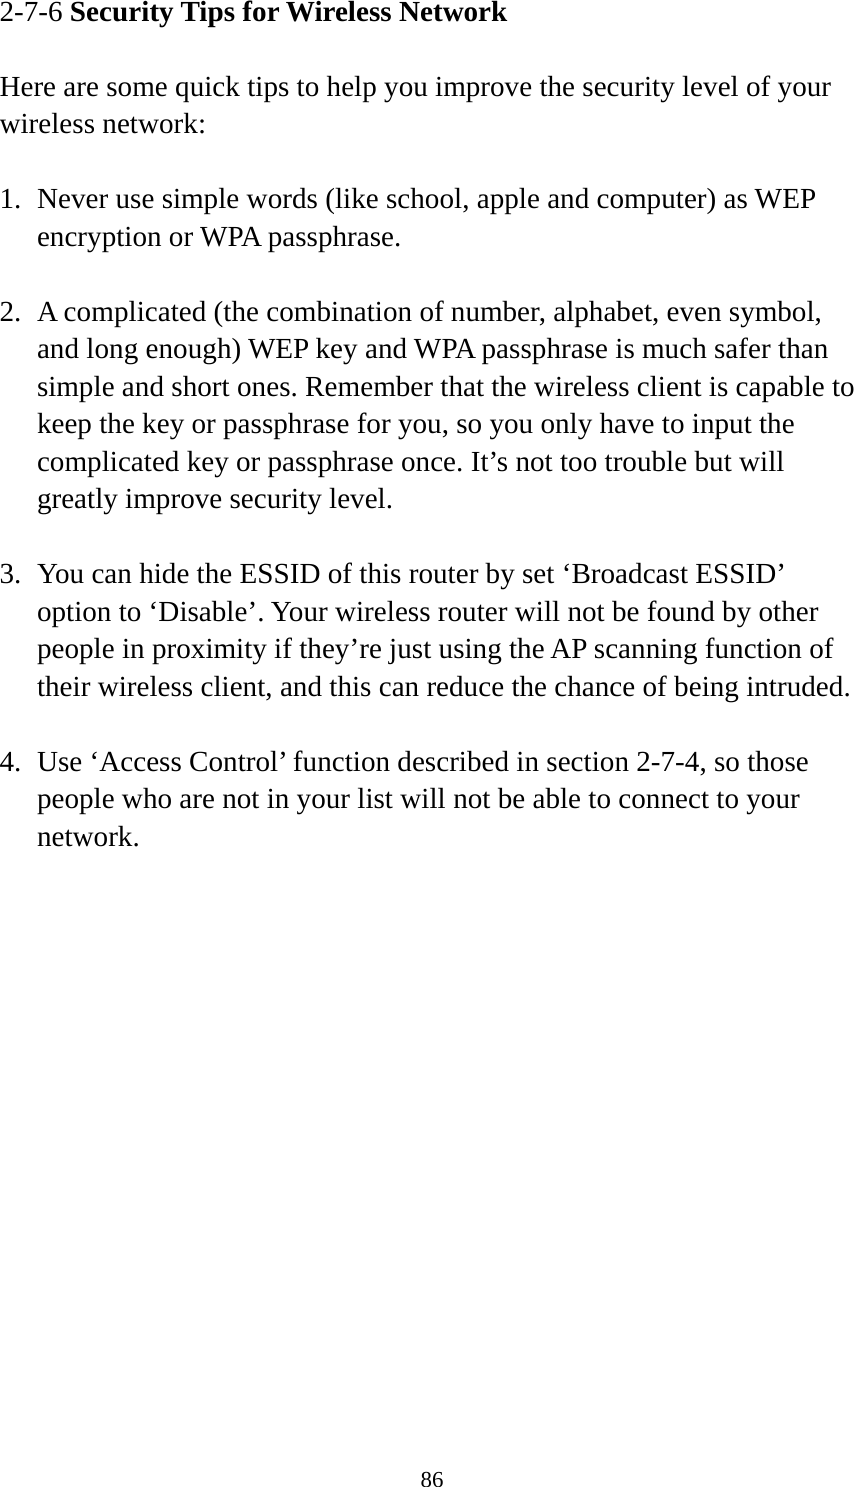 86 2-7-6 Security Tips for Wireless Network  Here are some quick tips to help you improve the security level of your wireless network:  1. Never use simple words (like school, apple and computer) as WEP encryption or WPA passphrase.  2. A complicated (the combination of number, alphabet, even symbol, and long enough) WEP key and WPA passphrase is much safer than simple and short ones. Remember that the wireless client is capable to keep the key or passphrase for you, so you only have to input the complicated key or passphrase once. It’s not too trouble but will greatly improve security level.  3. You can hide the ESSID of this router by set ‘Broadcast ESSID’ option to ‘Disable’. Your wireless router will not be found by other people in proximity if they’re just using the AP scanning function of their wireless client, and this can reduce the chance of being intruded.  4. Use ‘Access Control’ function described in section 2-7-4, so those people who are not in your list will not be able to connect to your network. 